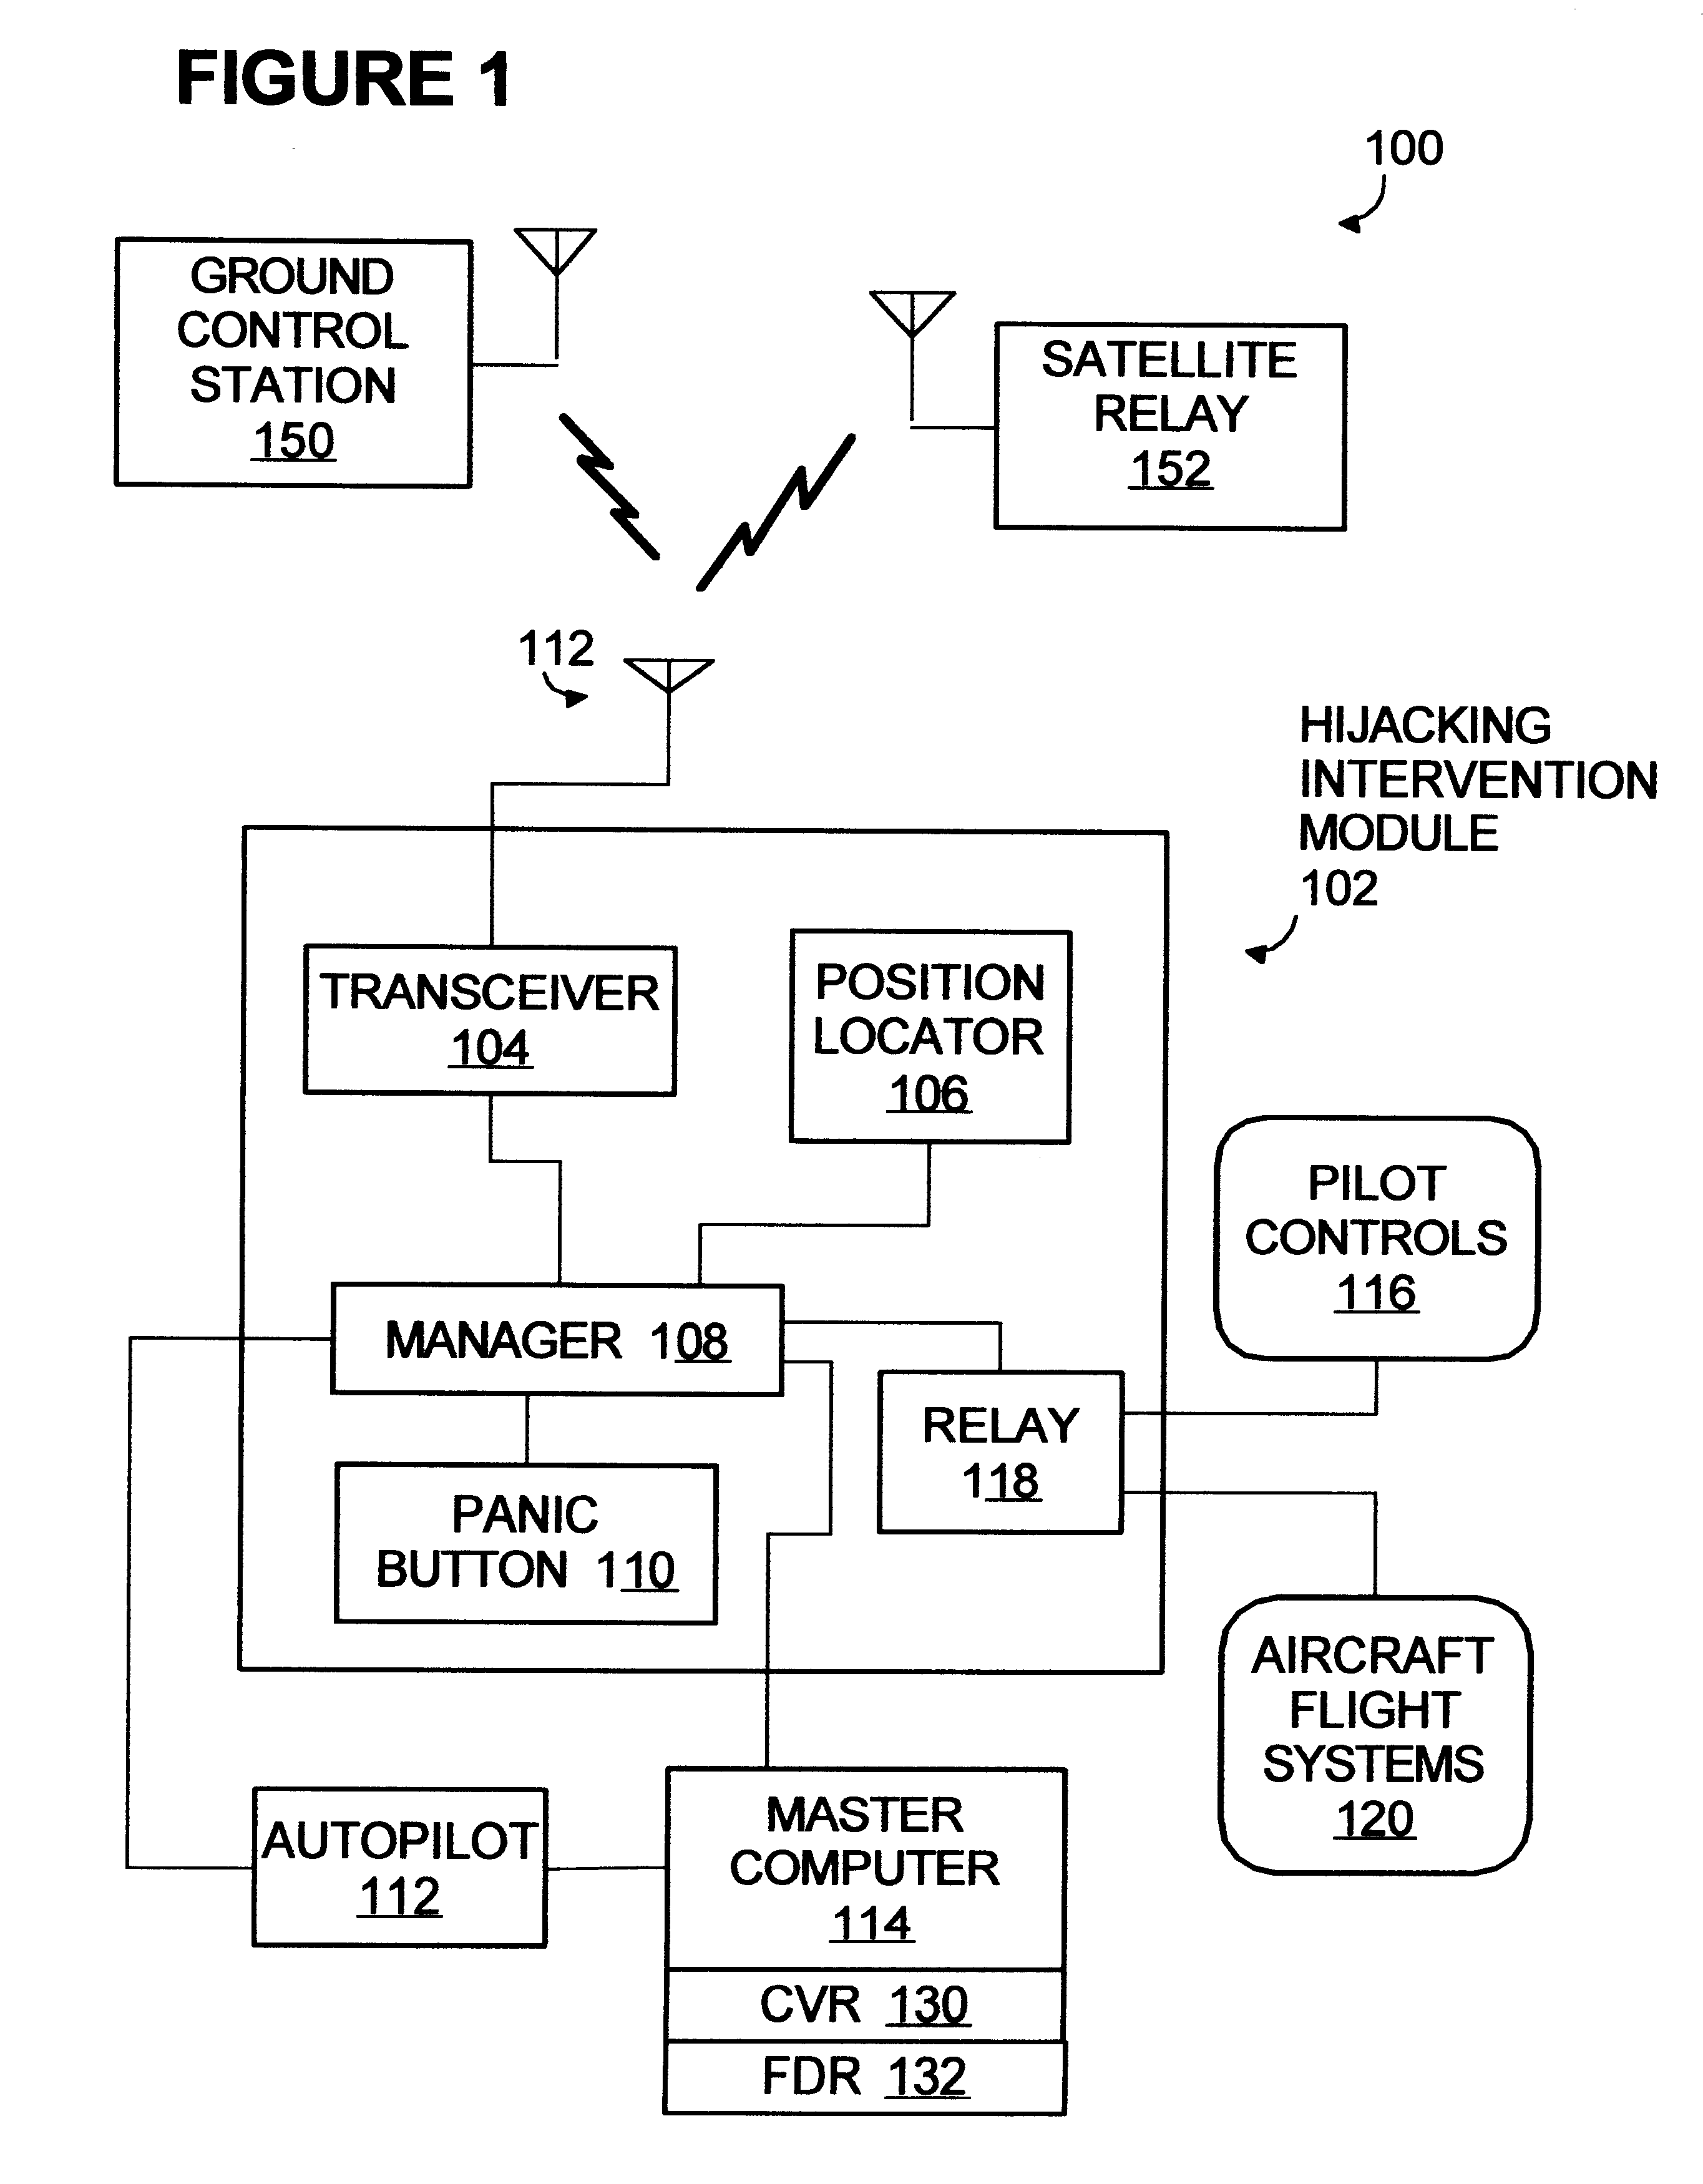 Anti-hijacking system operable in emergencies to deactivate on-board flight controls and remotely pilot aircraft utilizing autopilot